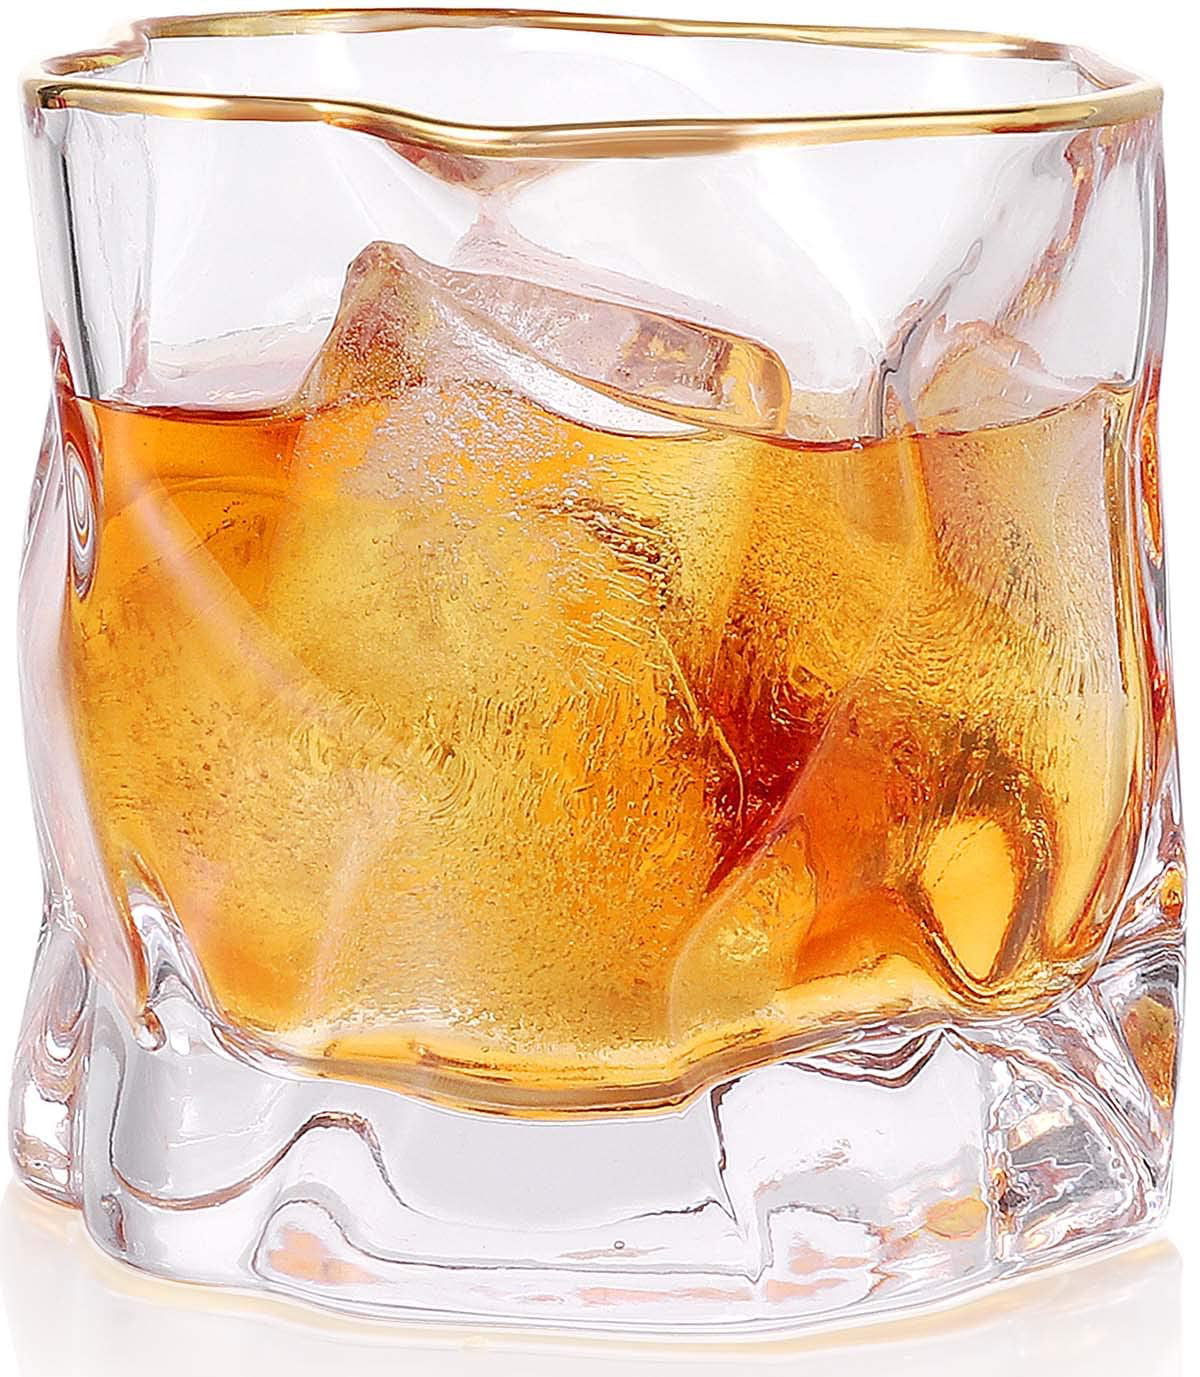 Funny Whiskey Dad Juice Cup Gift Glass Bourbon Scotch Cocktail Rocks Tumbler The 10oz Drink Glass is Perfect Whiskey Makes a Great Drinking Fathers Day Gift for Men Under $20